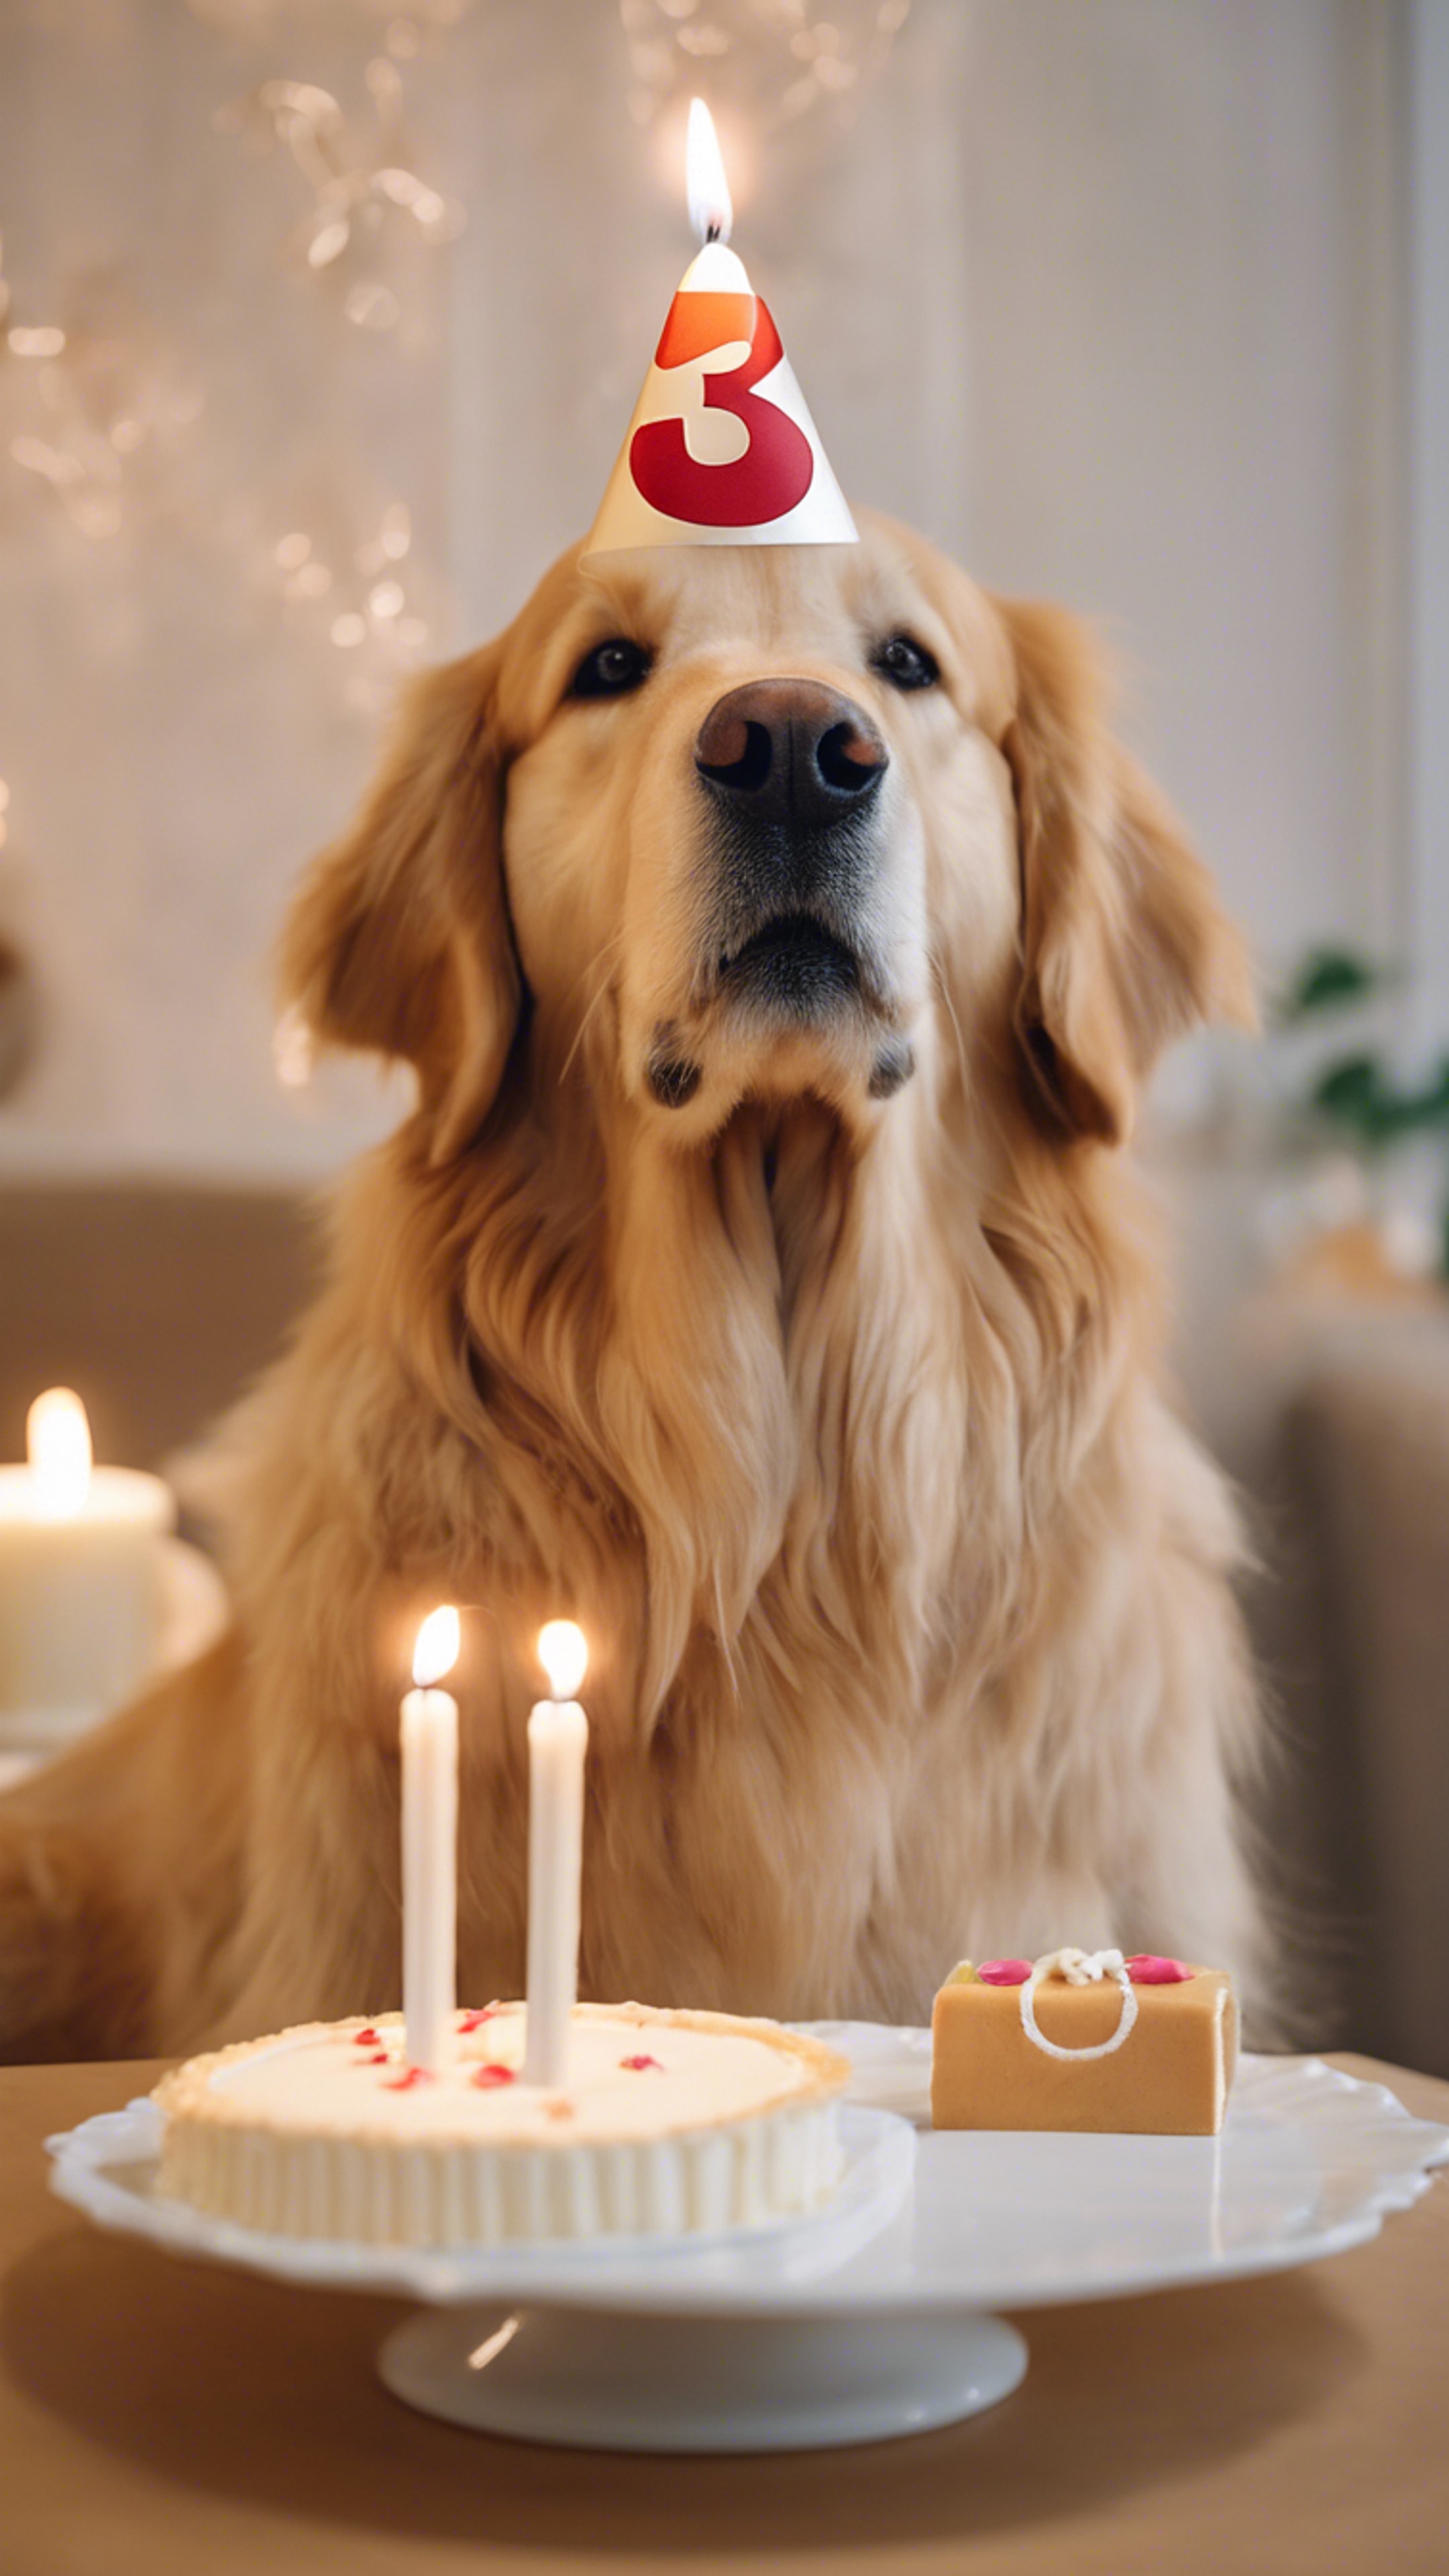 A golden retriever wearing a birthday hat, sitting in front of a numbered '3' candle on a small cake, looking eagerly at the camera. Tapeta[271fe240b95e4af1b864]